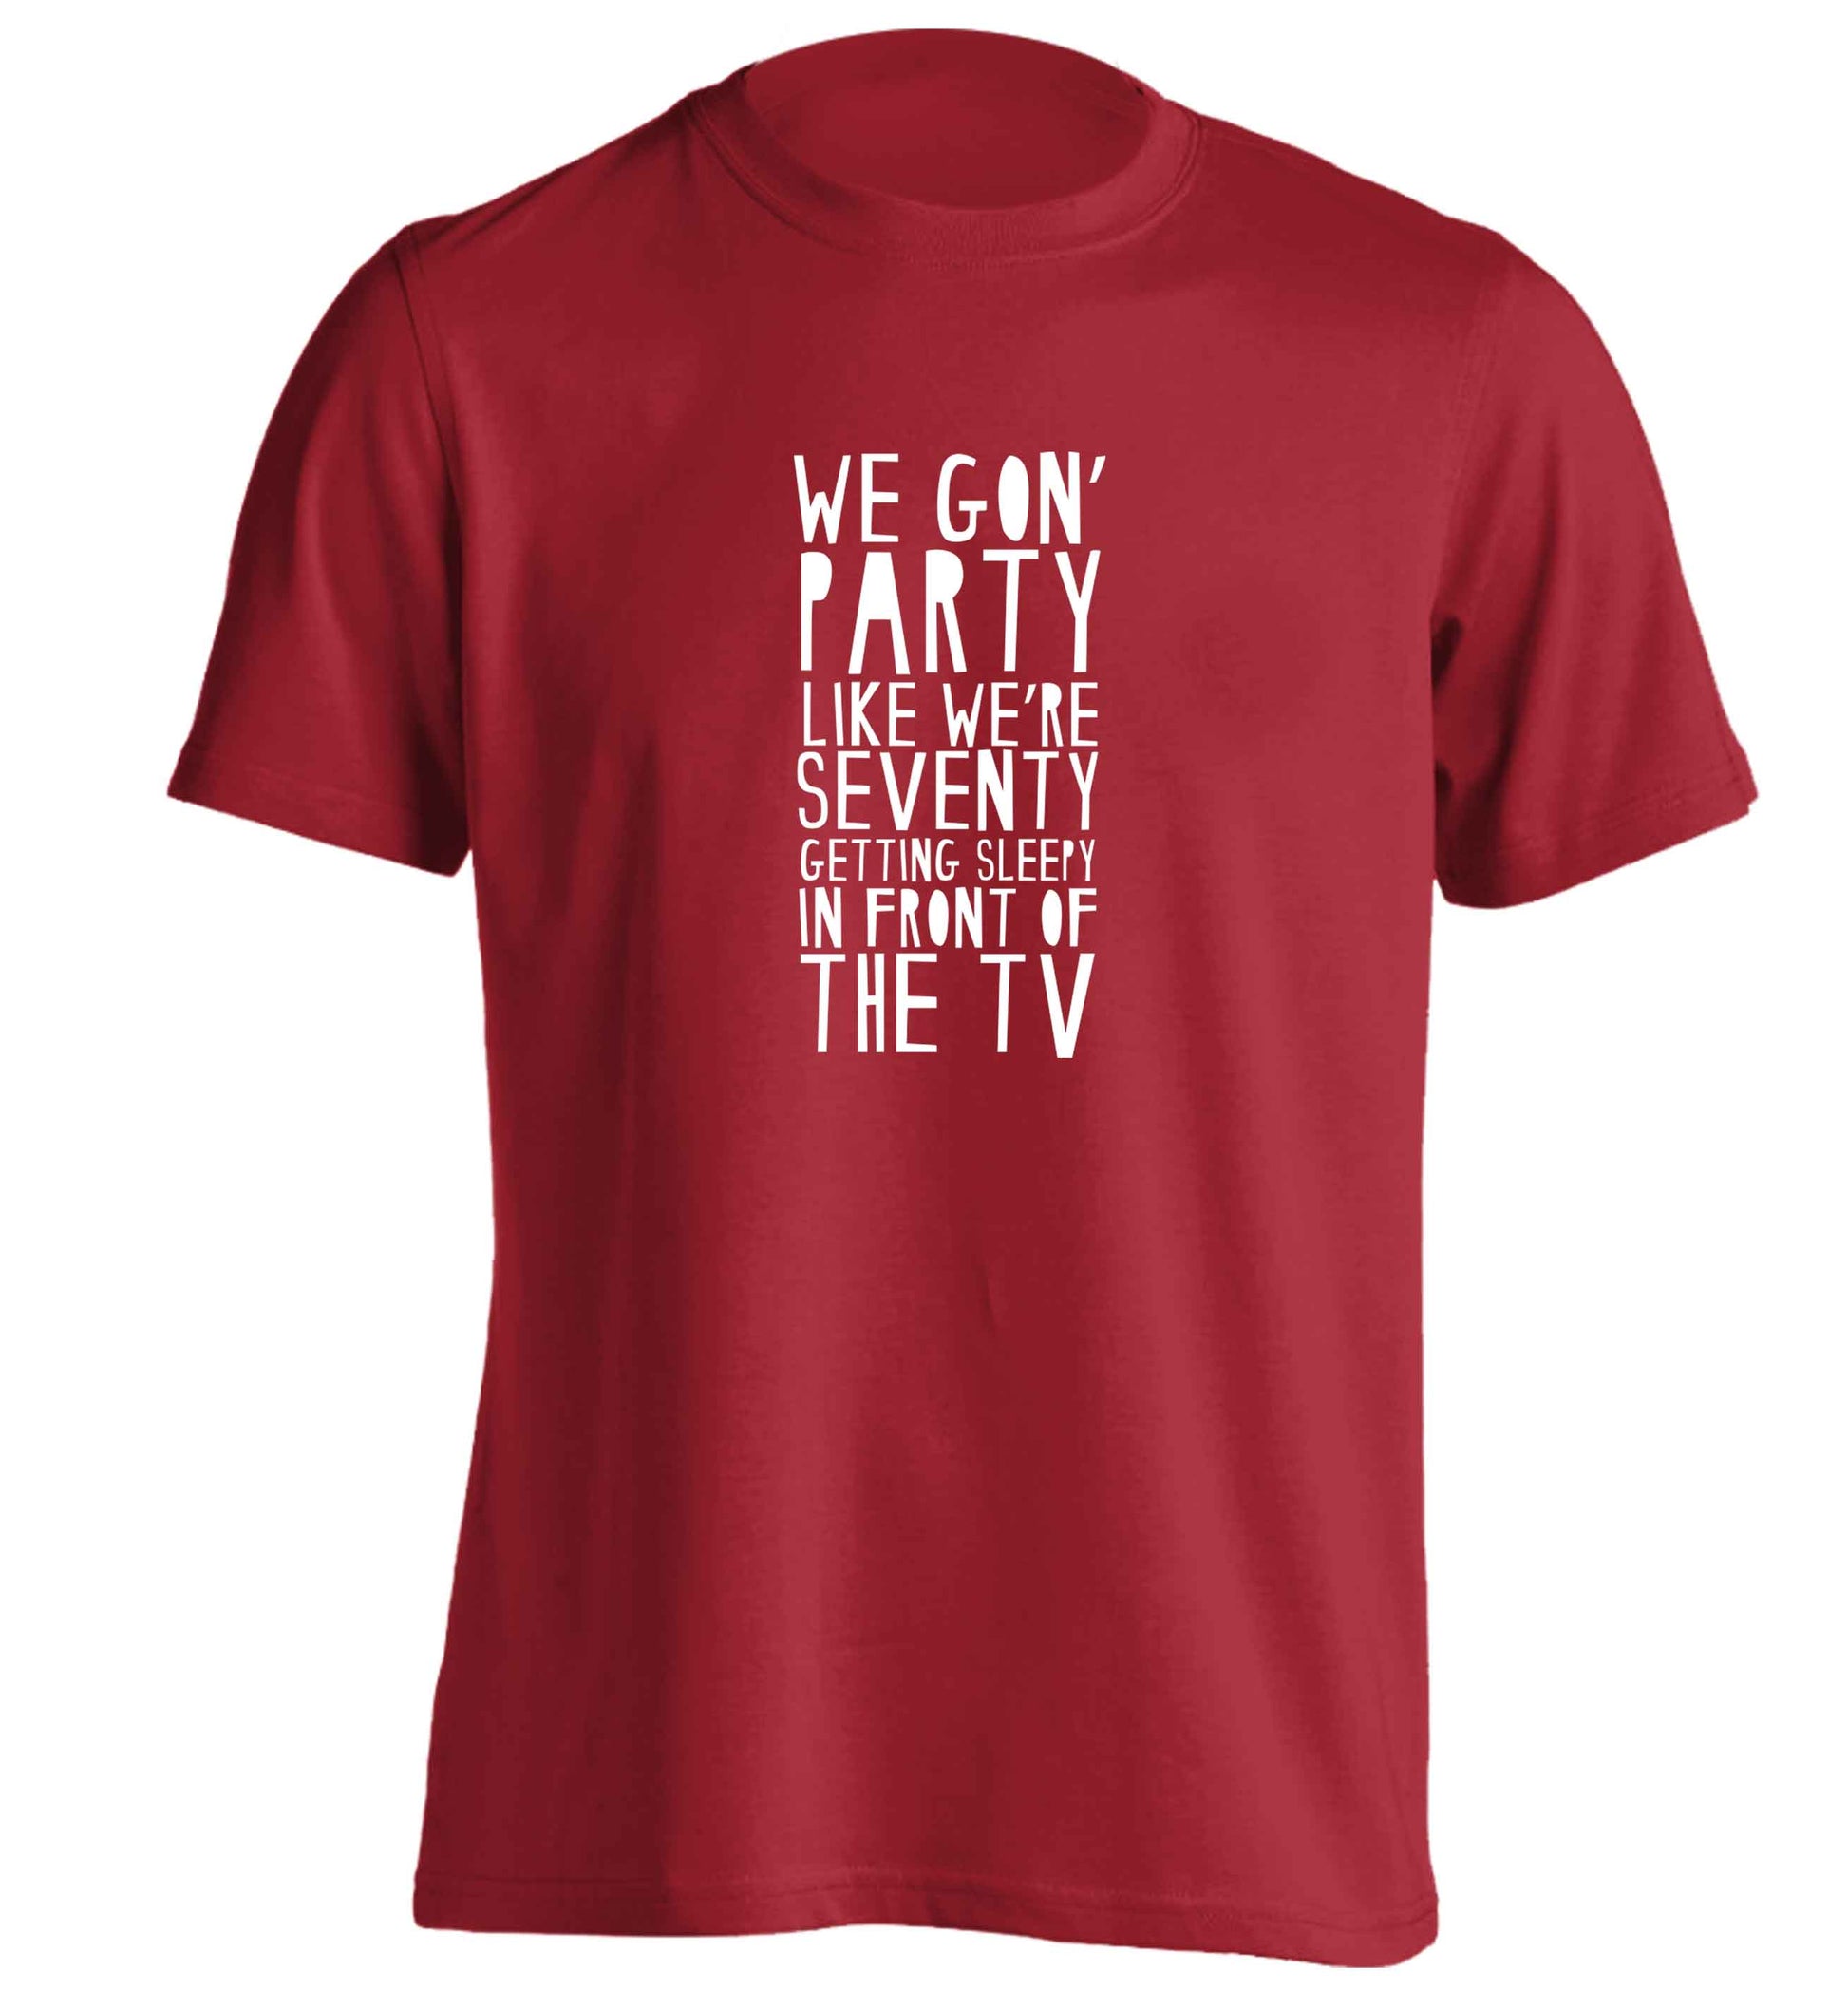 We gon' party like we're seventy getting sleepy in front of the TV adults unisex red Tshirt 2XL